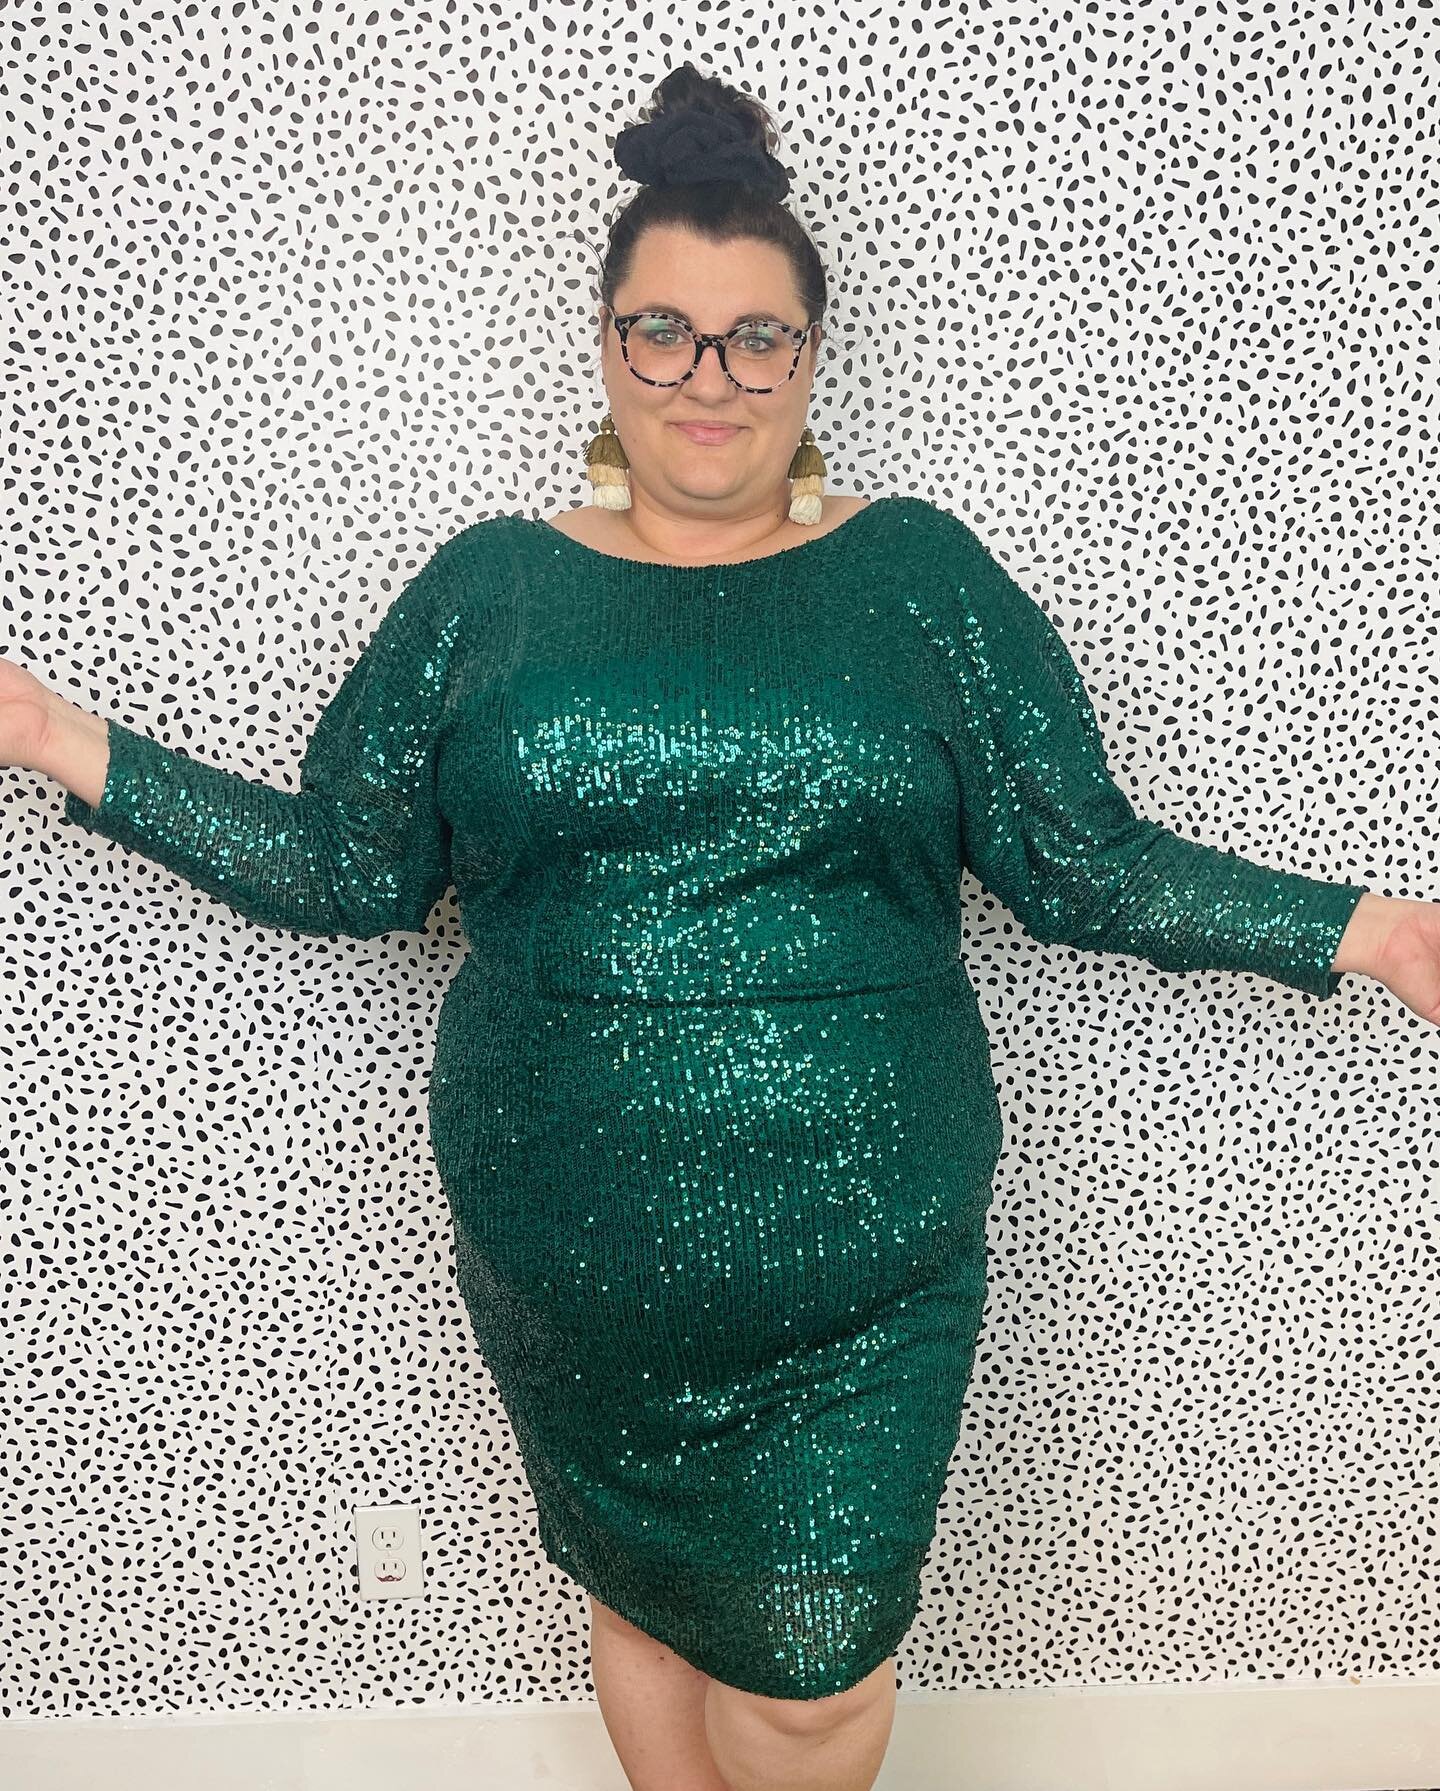 Playing dress up at work! New items in our @cakeplussize online shop&hellip; here are my favorite green pieces!